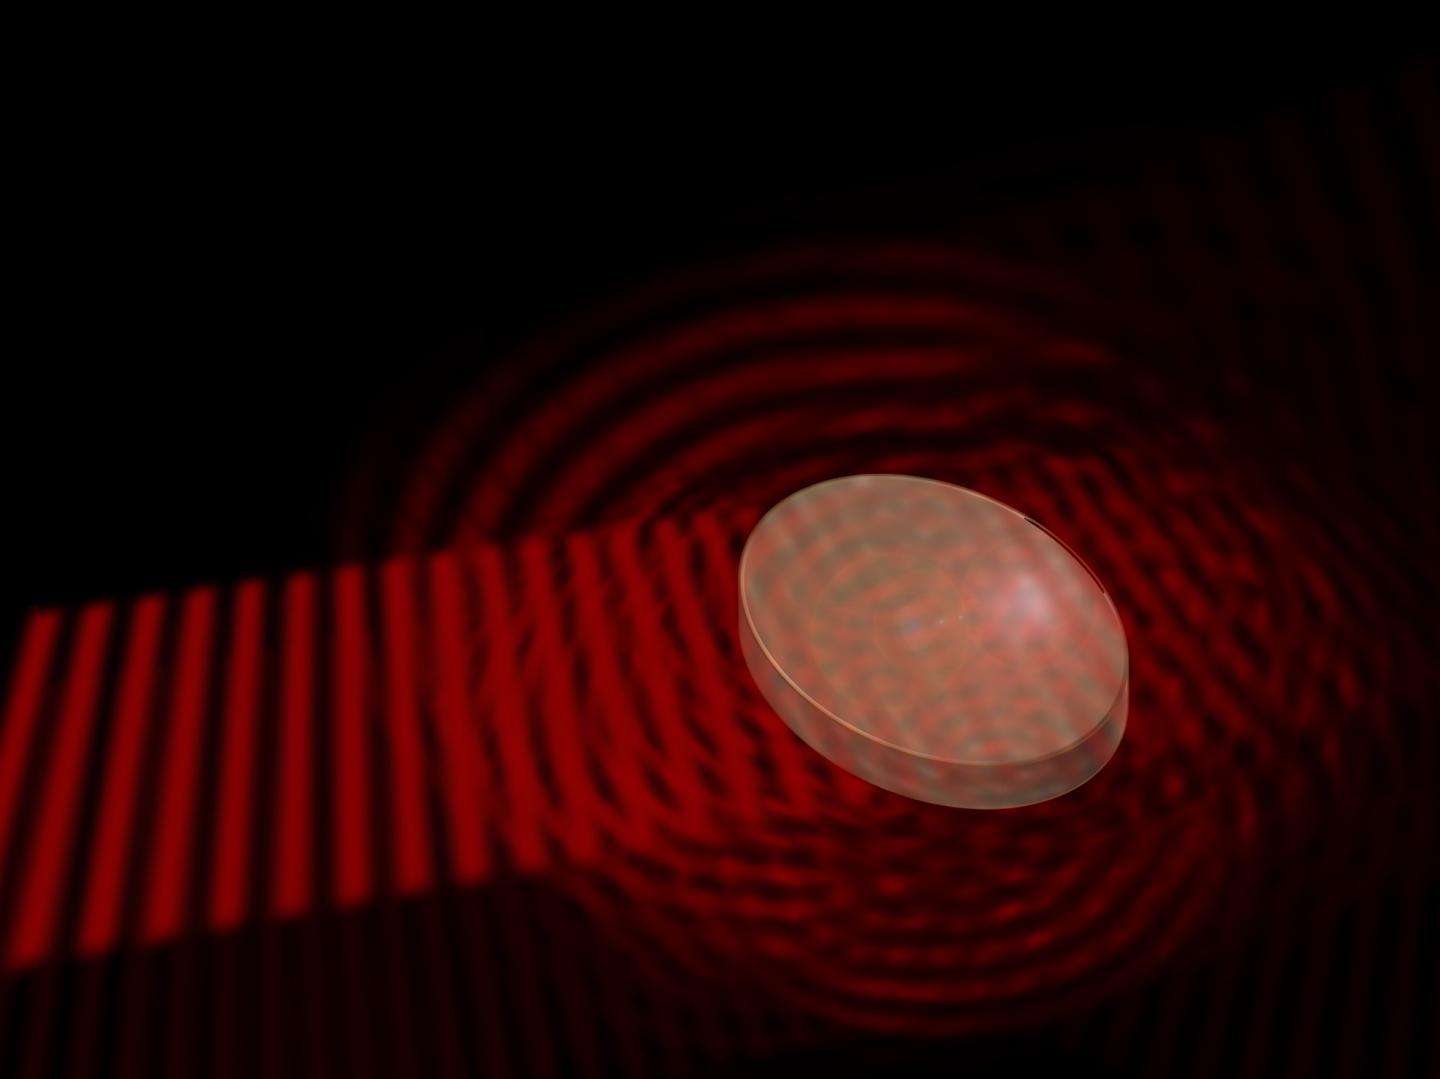 Cloaking Approach Enables Light to Pass Through Without Scattering